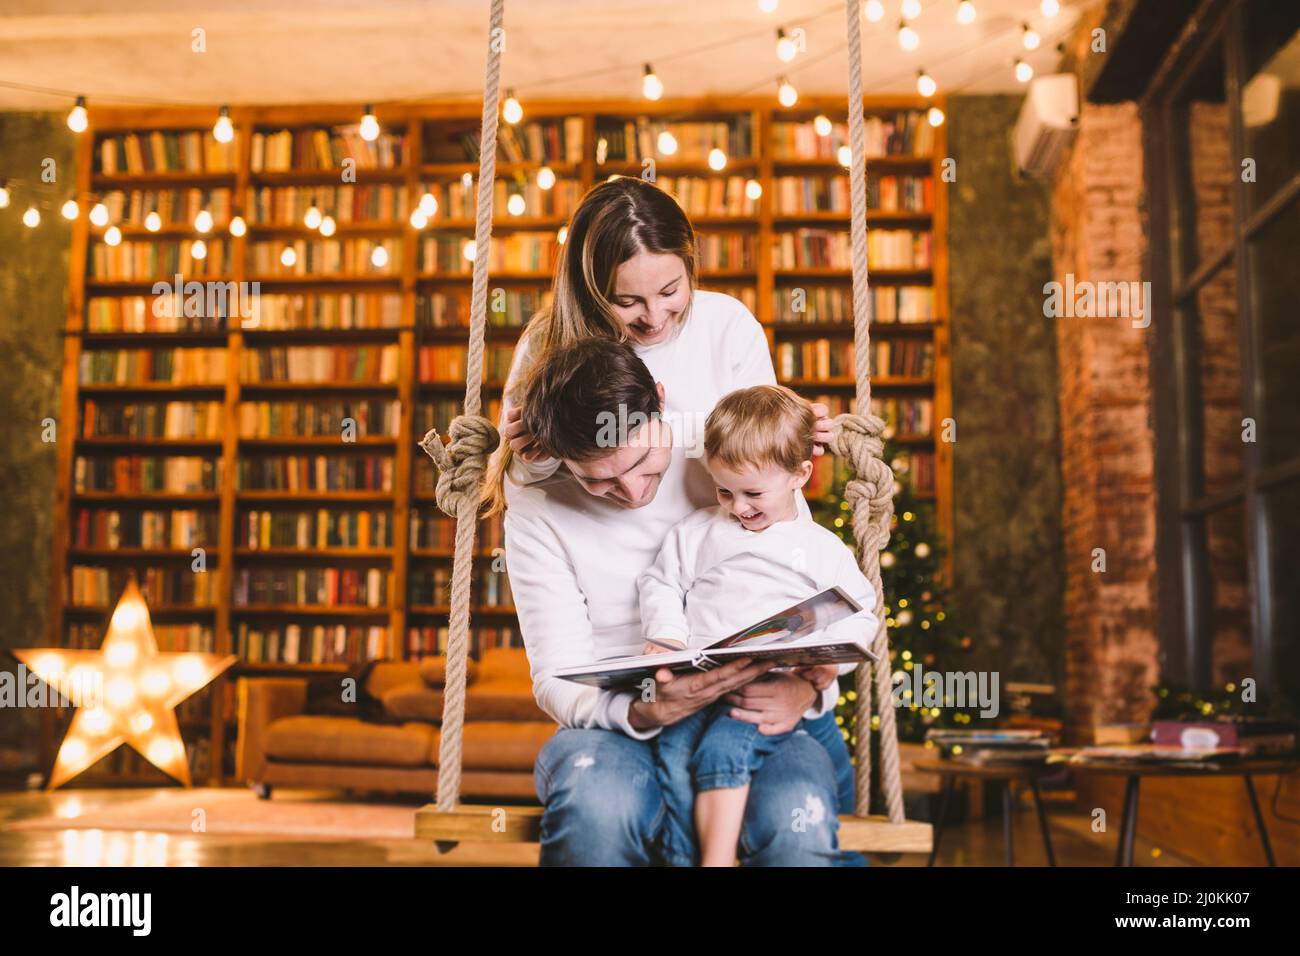 Family With Baby Relaxing On home Swing Seat in cozy dark living room on Christmas eve. Family having fun on seesaw. Winter even Stock Photo